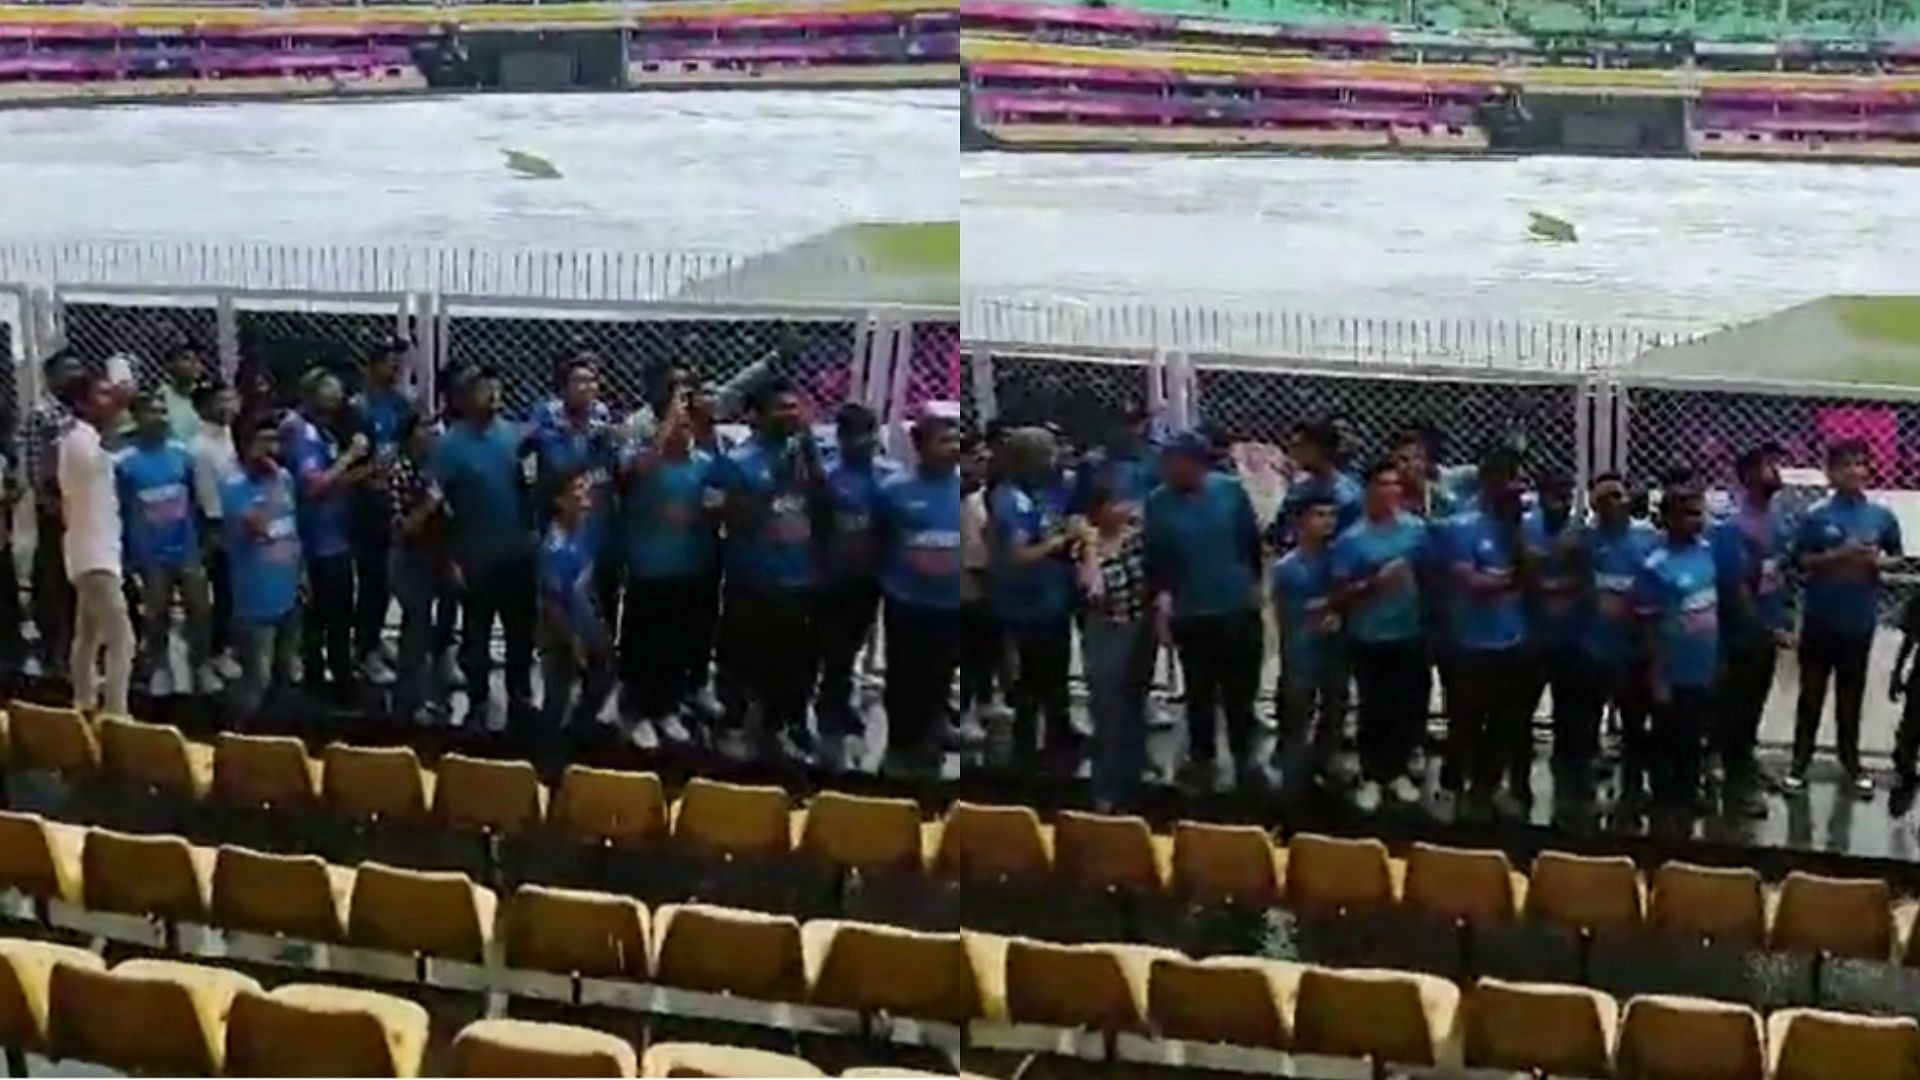 [Watch] Unaffected by heavy rain, fans chant for Virat Kohli, Rohit Sharma ahead of India's World Cup 2023 warm-up game against England